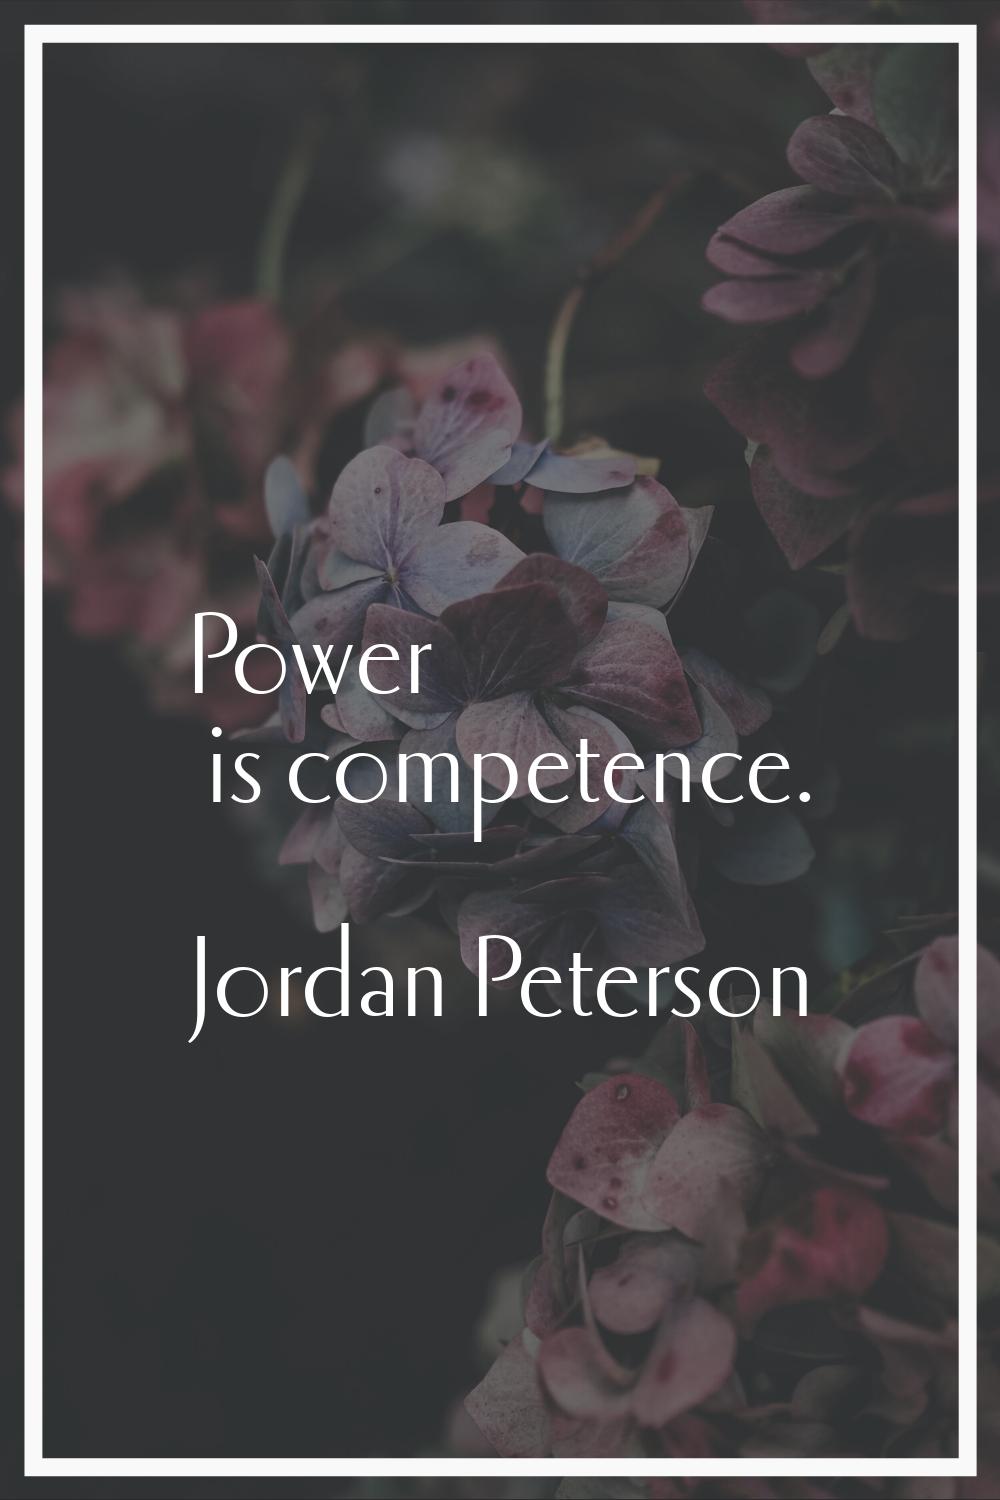 Power is competence.